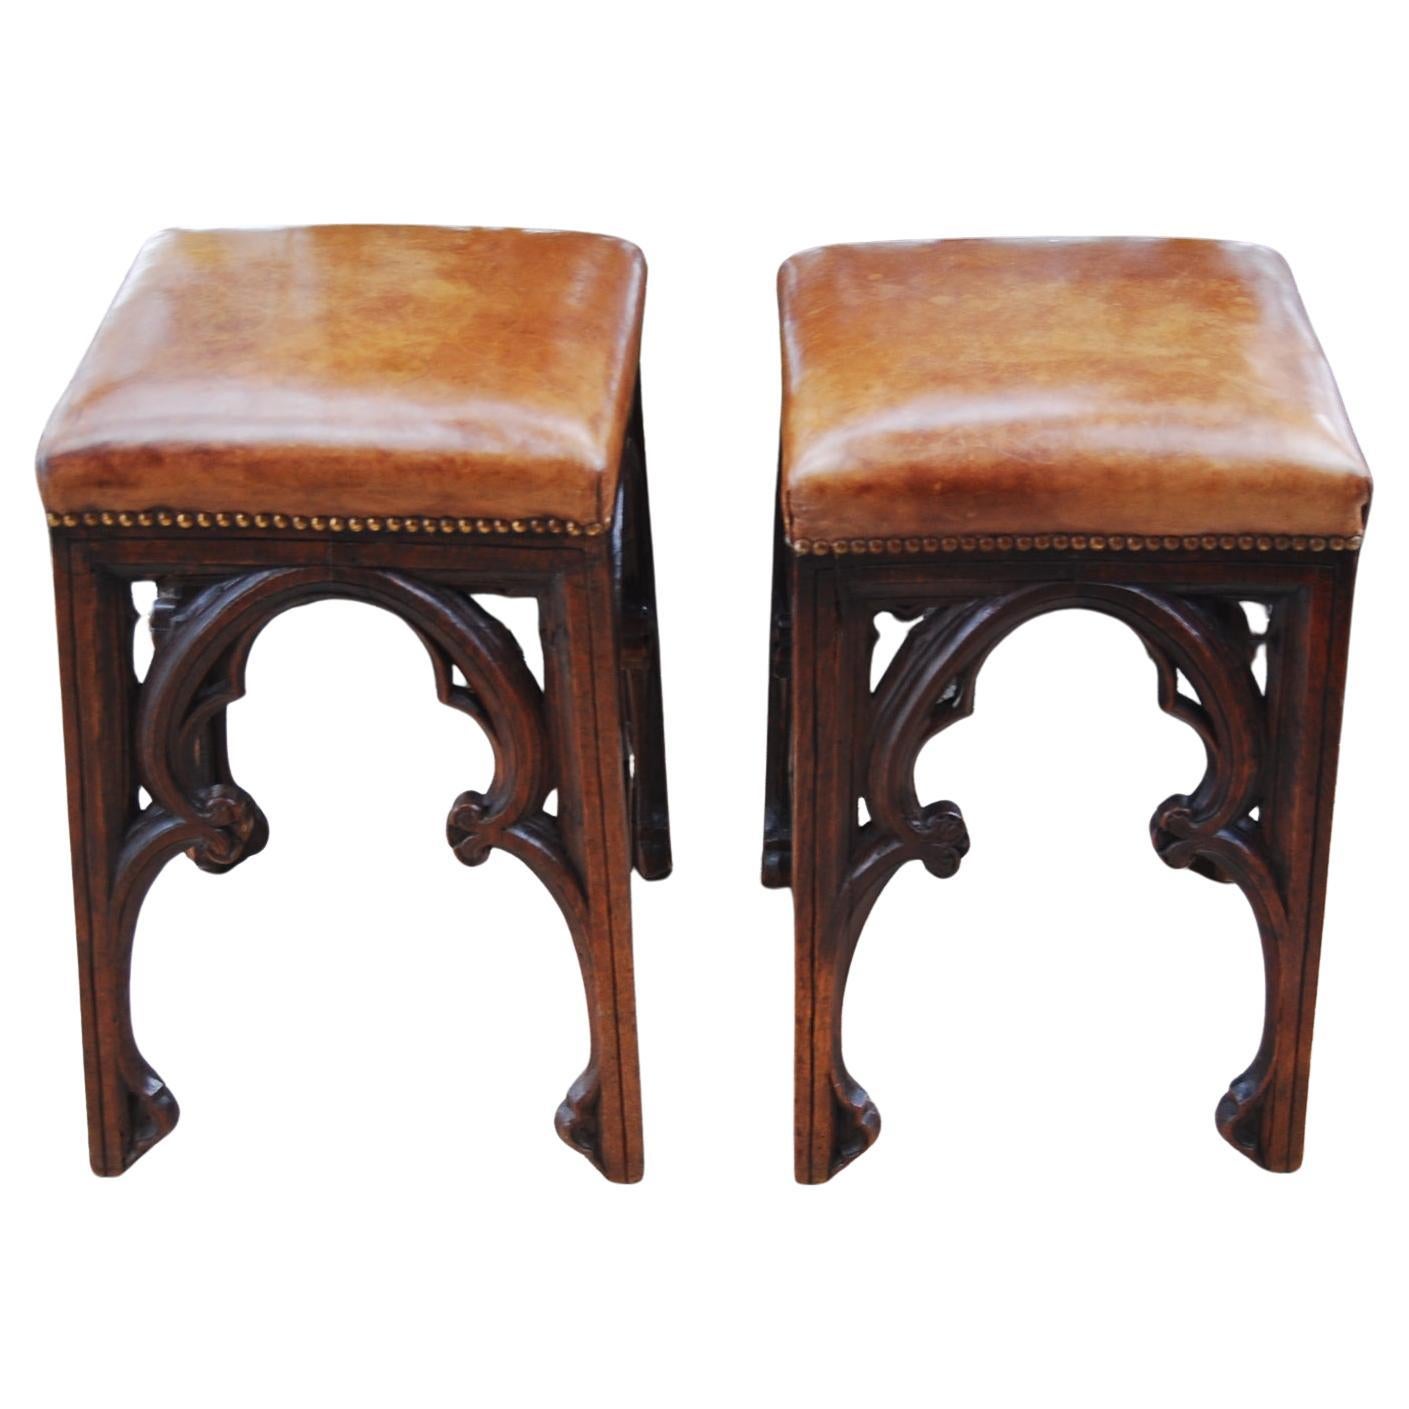 French Gothic Revival Pair of Carved Stools 19th Century For Sale